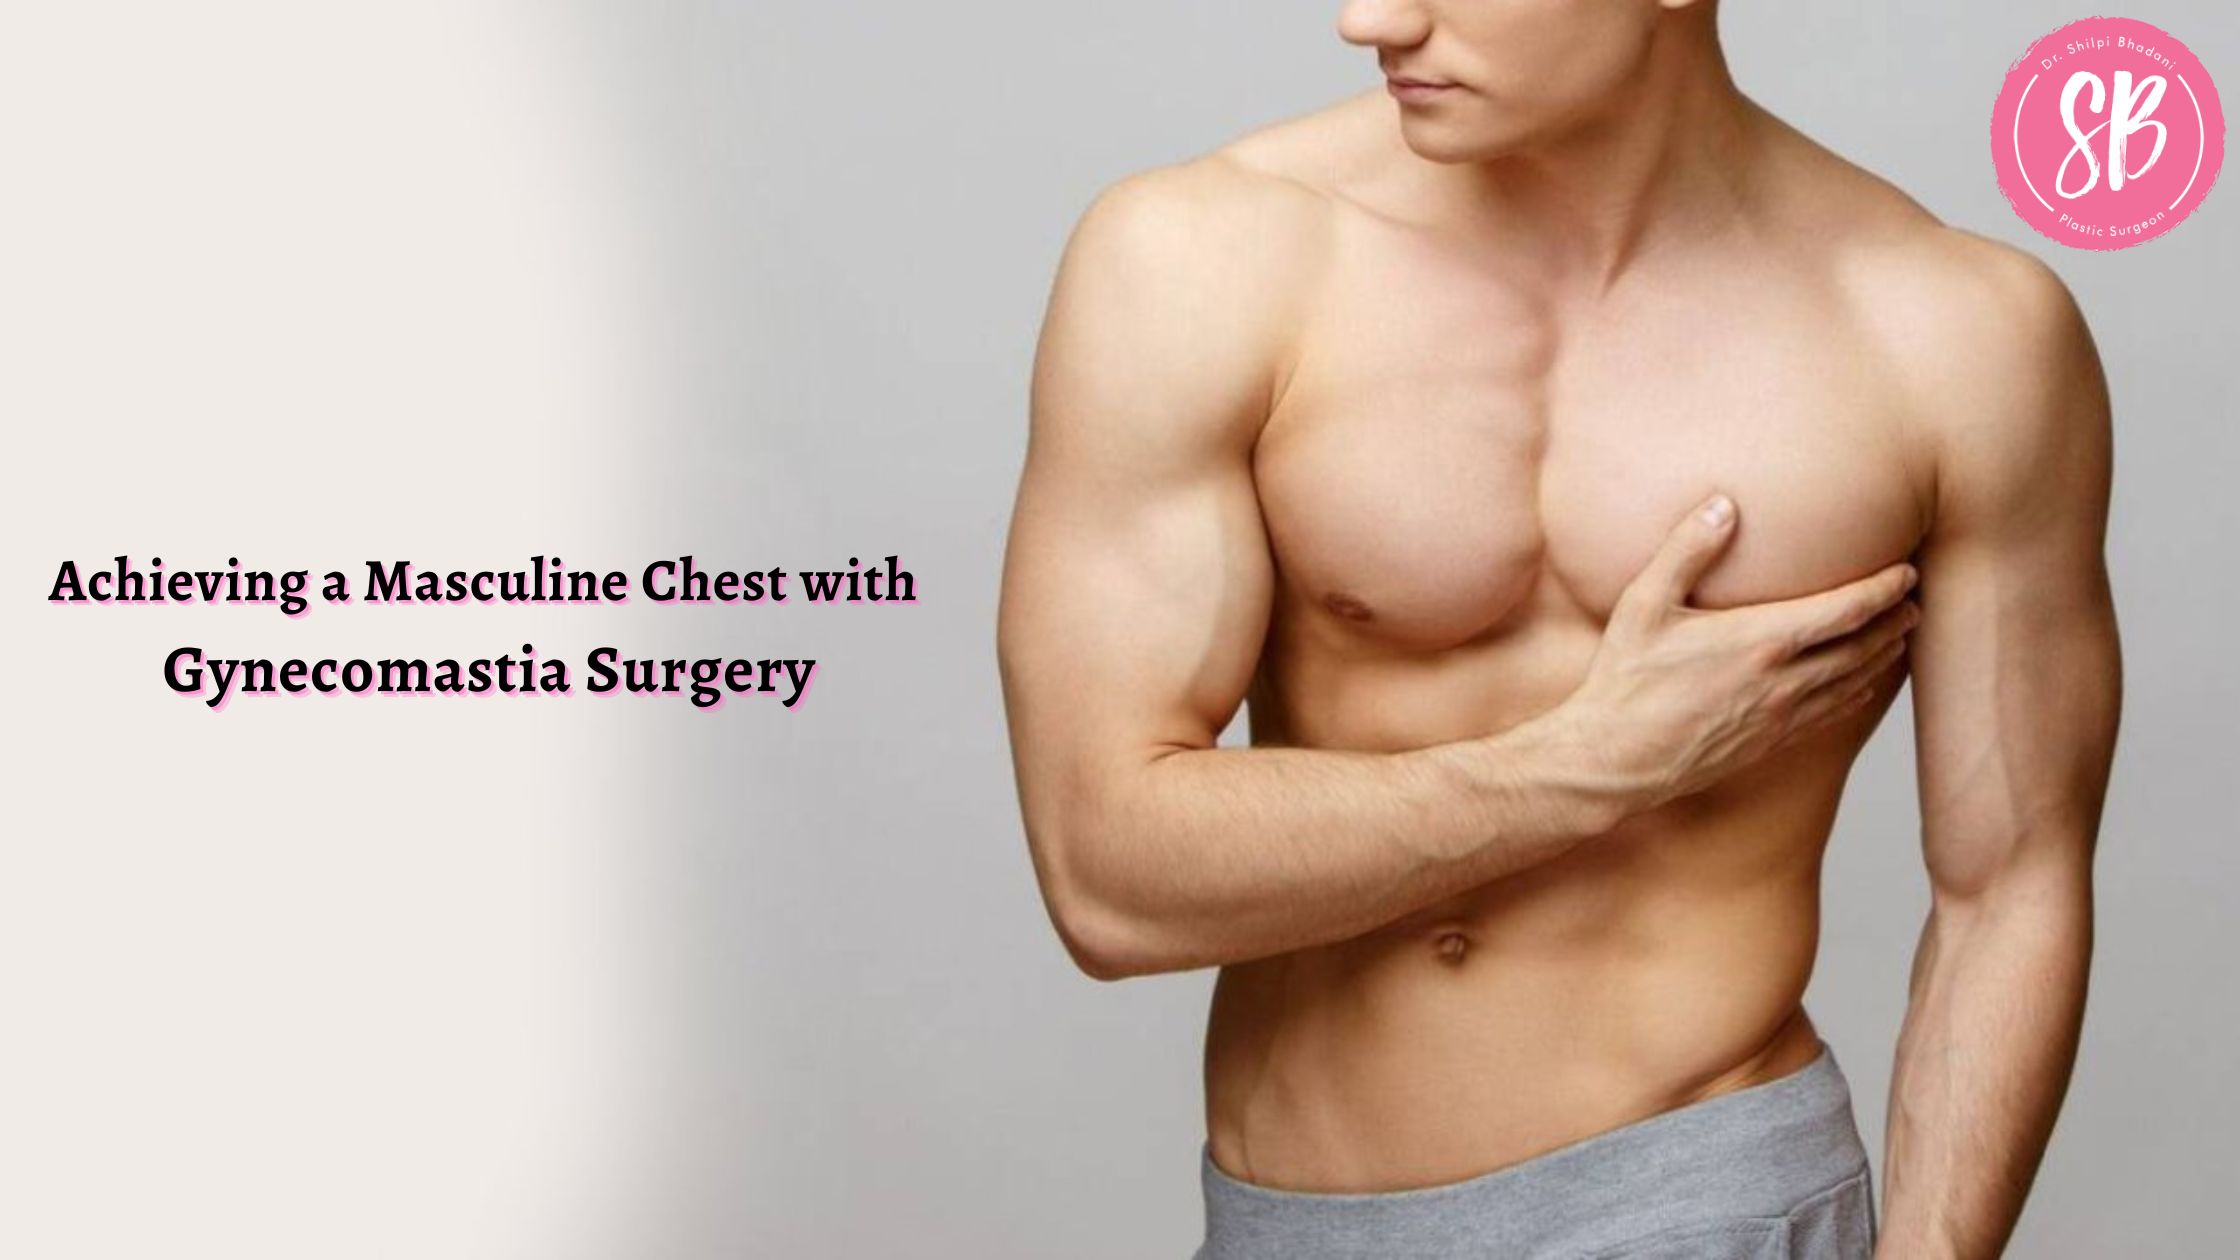 Achieving a Masculine Chest with Gynecomastia Surgery